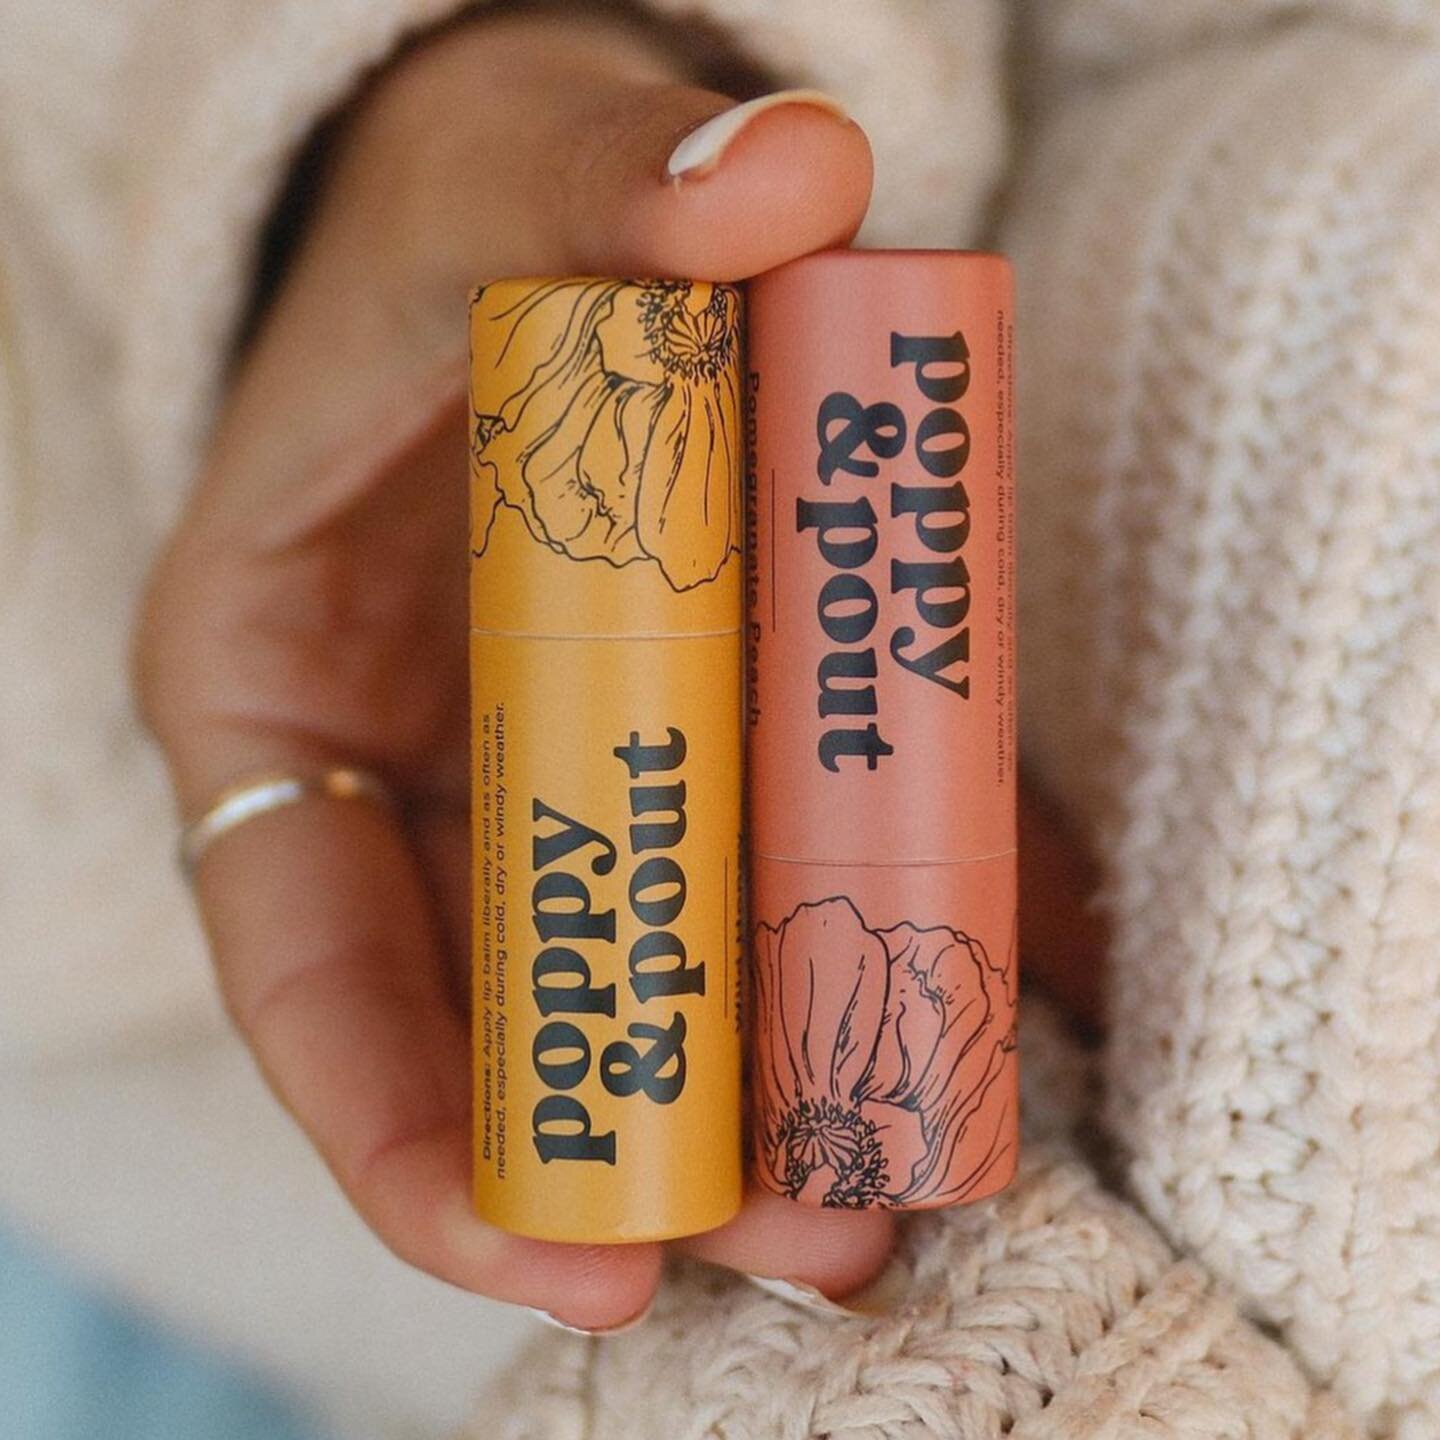 New in store!! 💋
@poppyandpout lip balms and scrub 

100% natural, untinted, and come in eco-friendly cardboard tubes! (As seen on Oprah's Favorite Things)